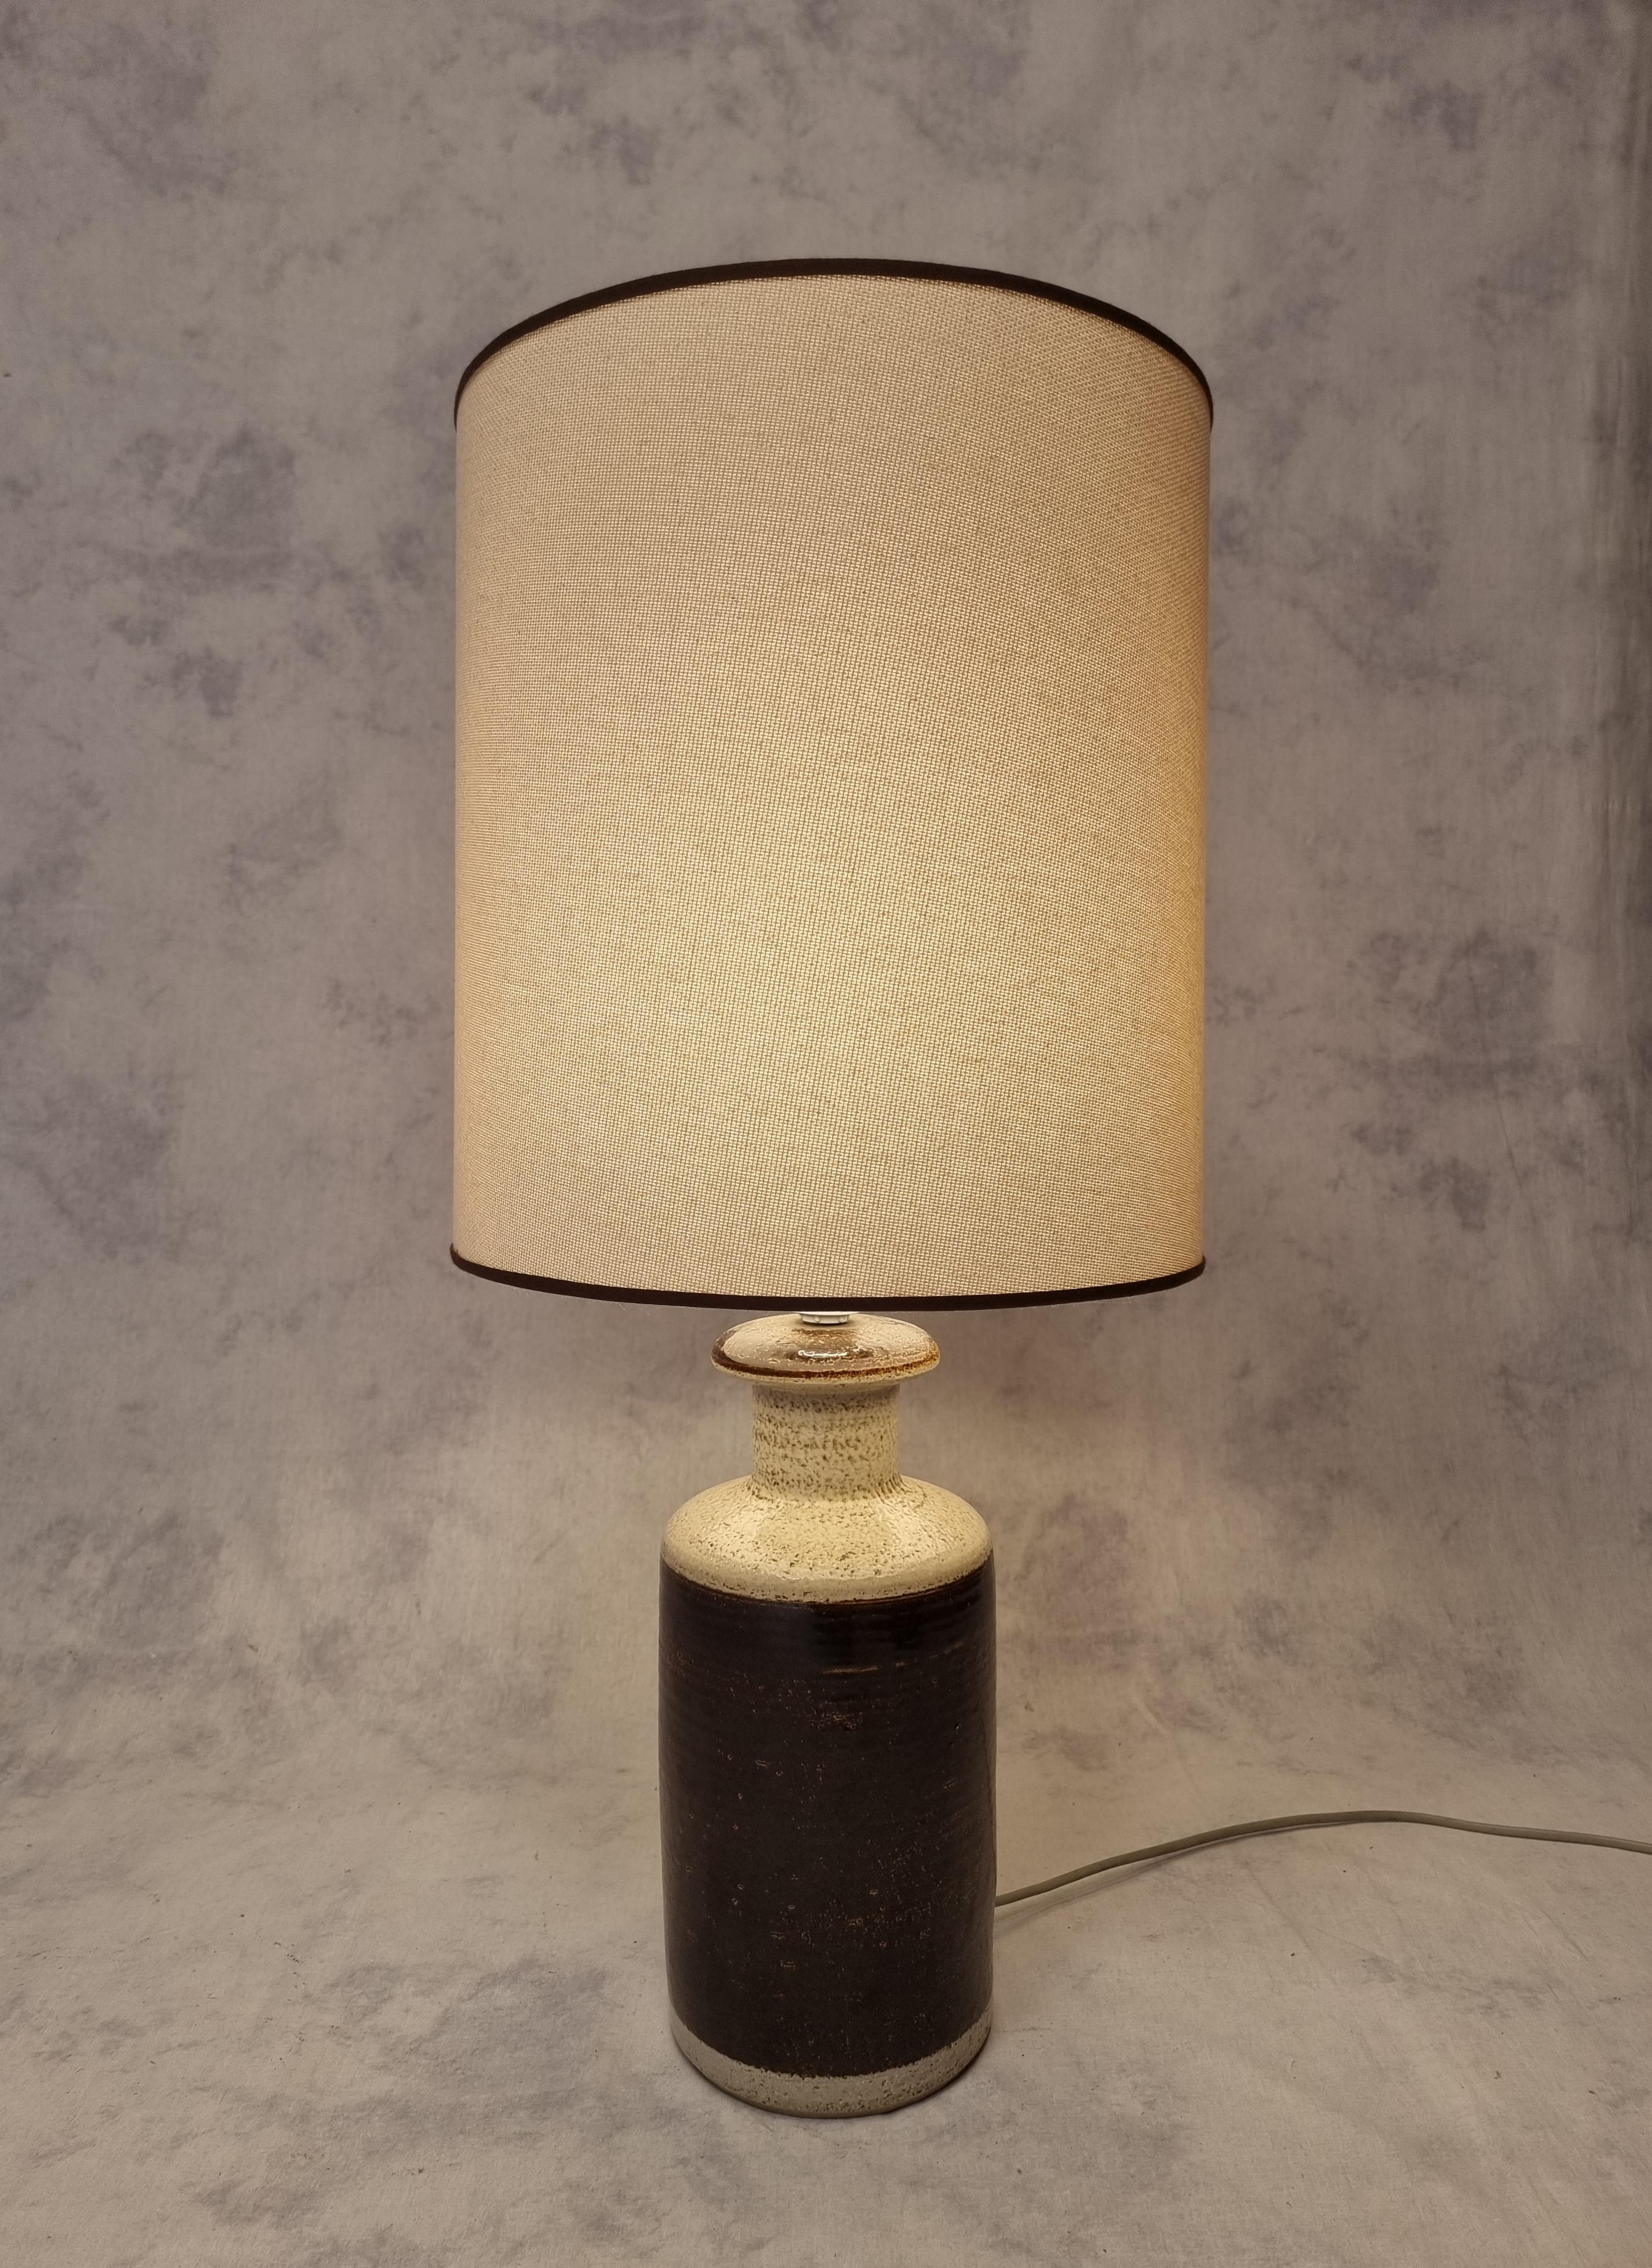 Important table lamp produced by the Danish ceramic factory Søholm Keramik. This factory is located on the island of Bornholm in Denmark. This lamp is mottled brown cream and enamelled cream mottled brown. The textured lampshade was ordered to